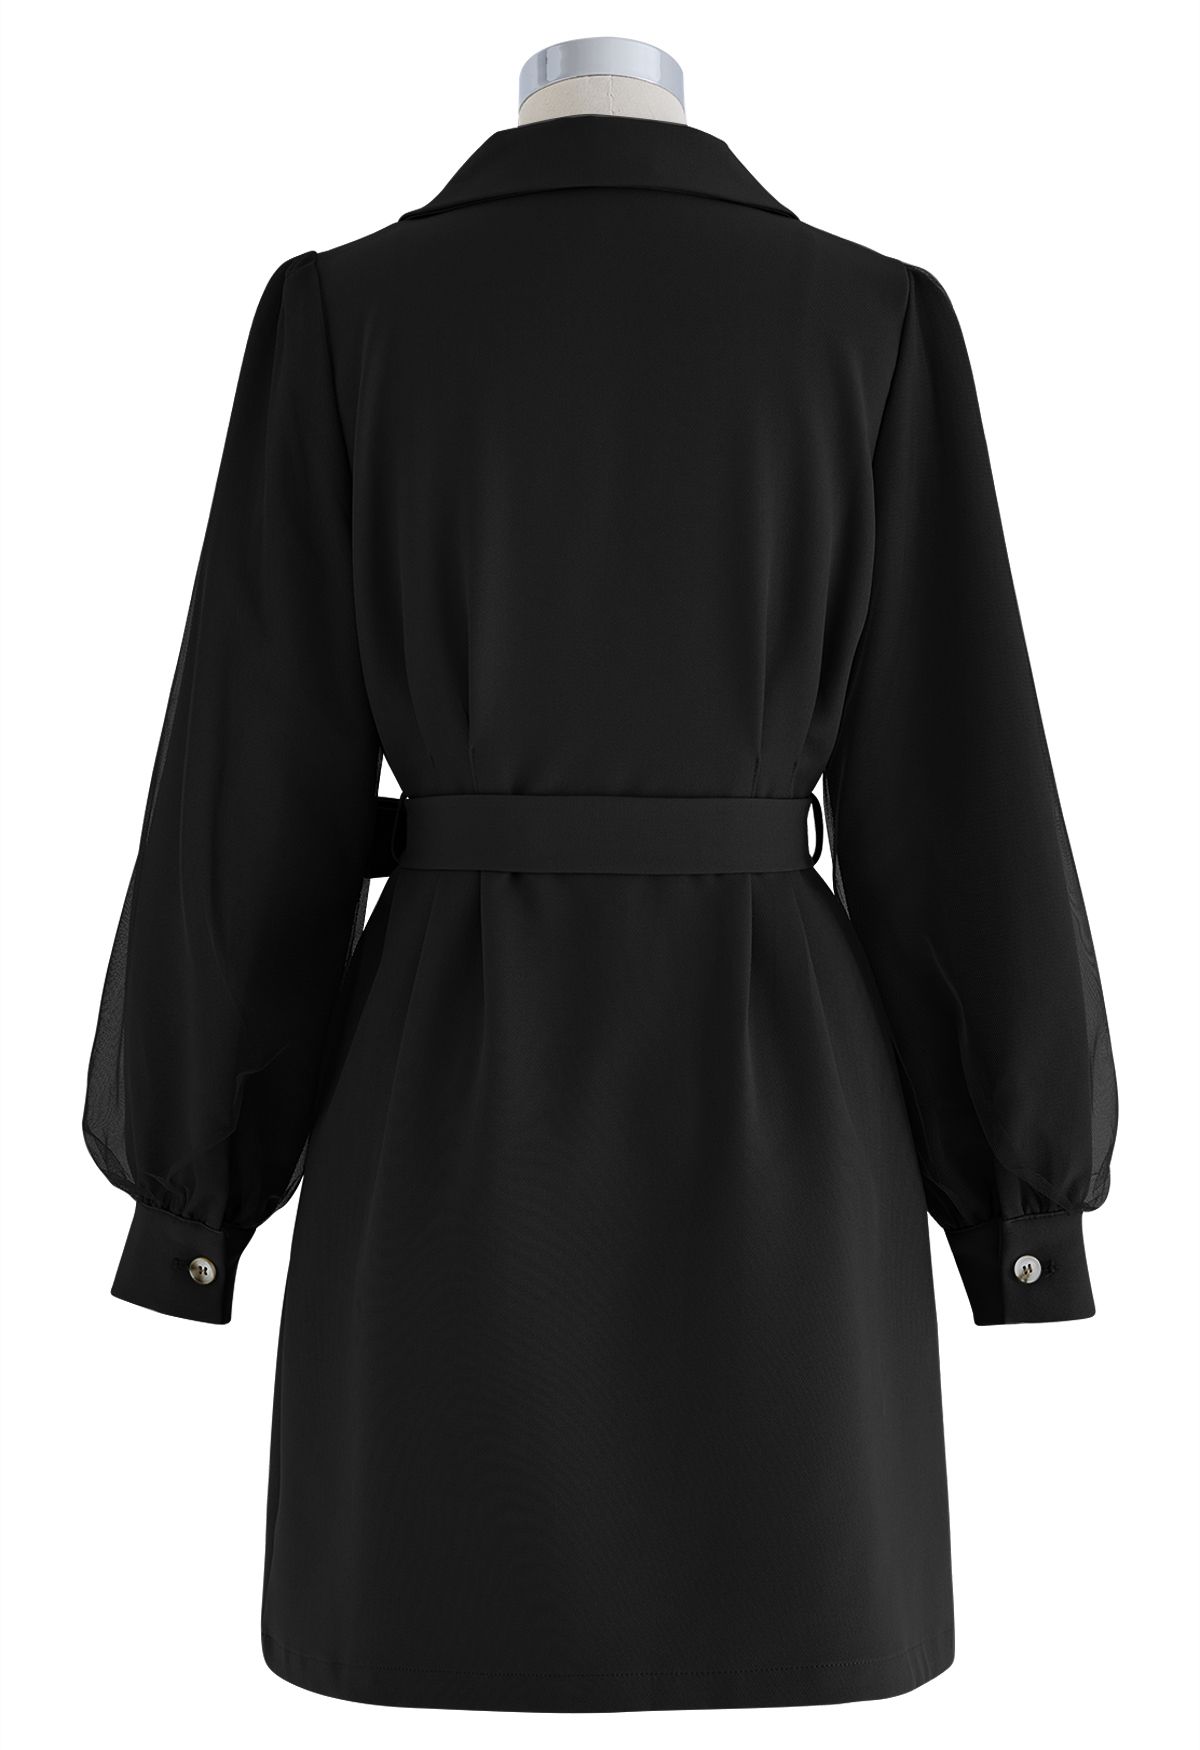 Mesh Overlay Sleeve Double Breasted Blazer Dress in Black